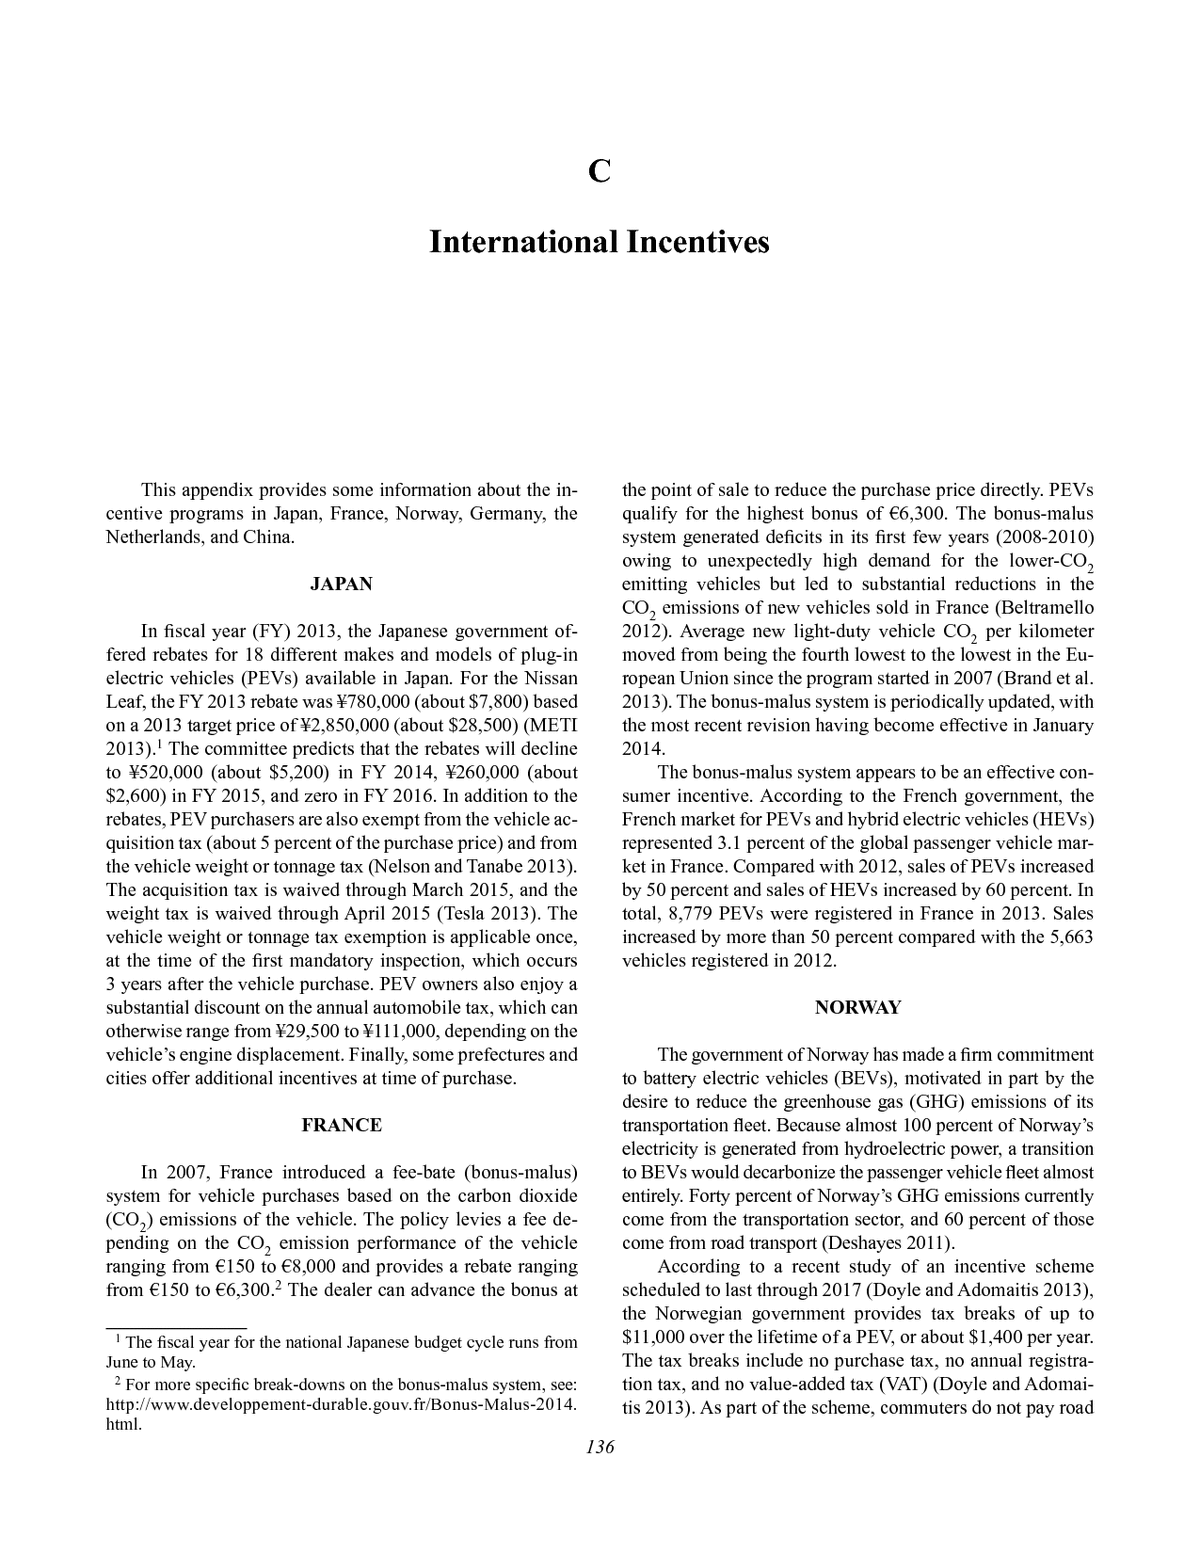 Appendix C International Incentives Barriers to